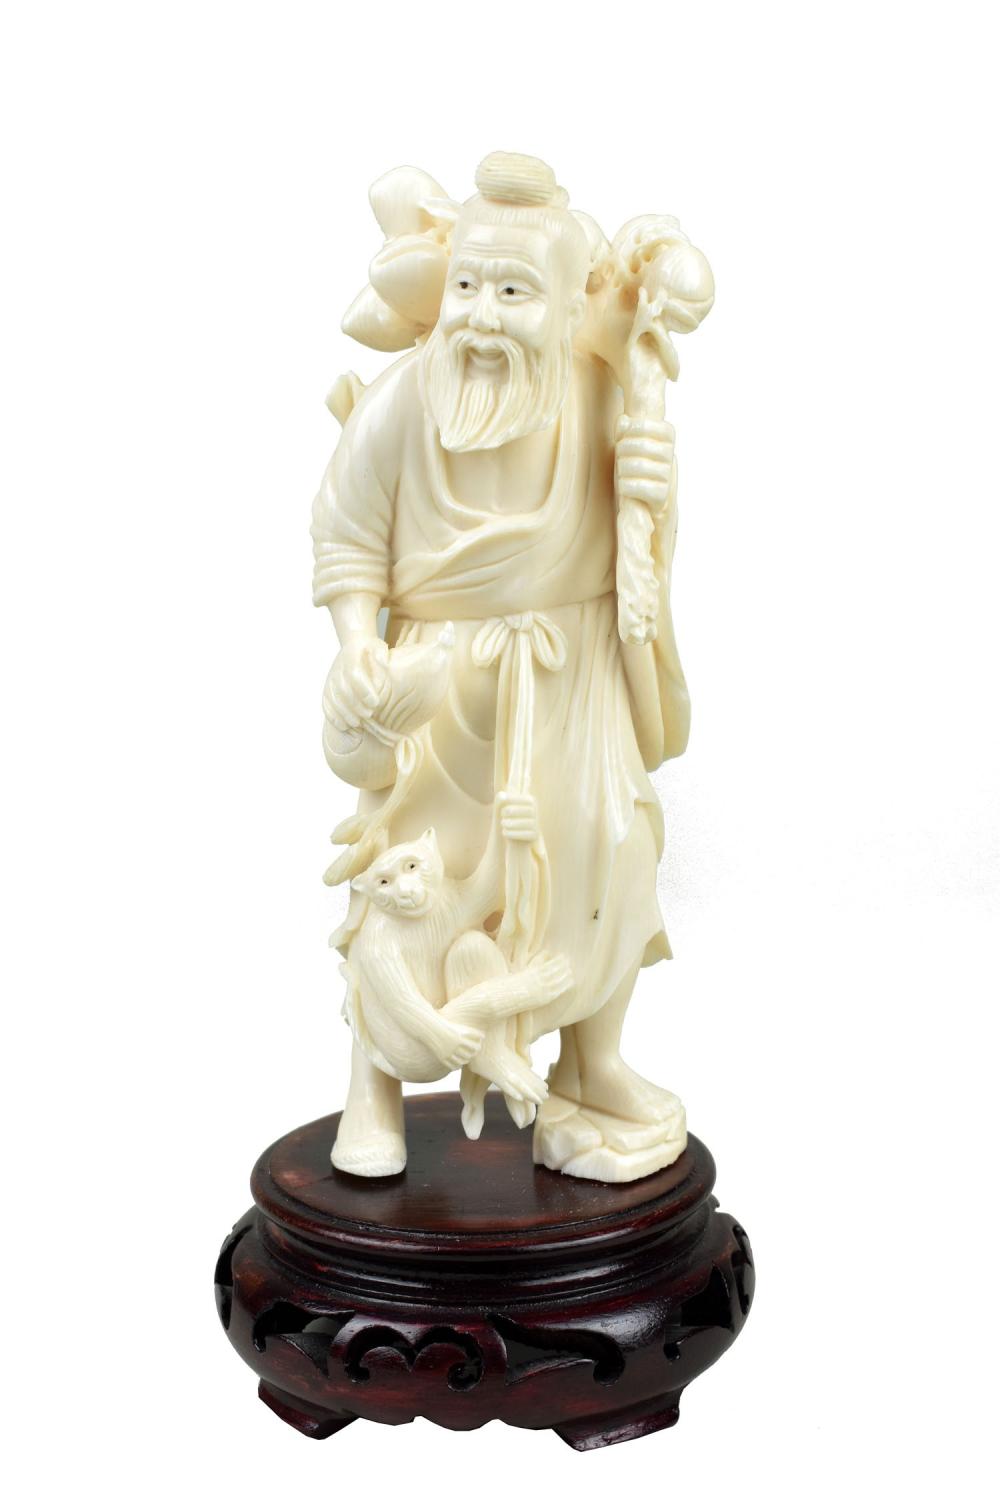 CHINESE FIGURE OF A FARMER COLLECTING 35344c